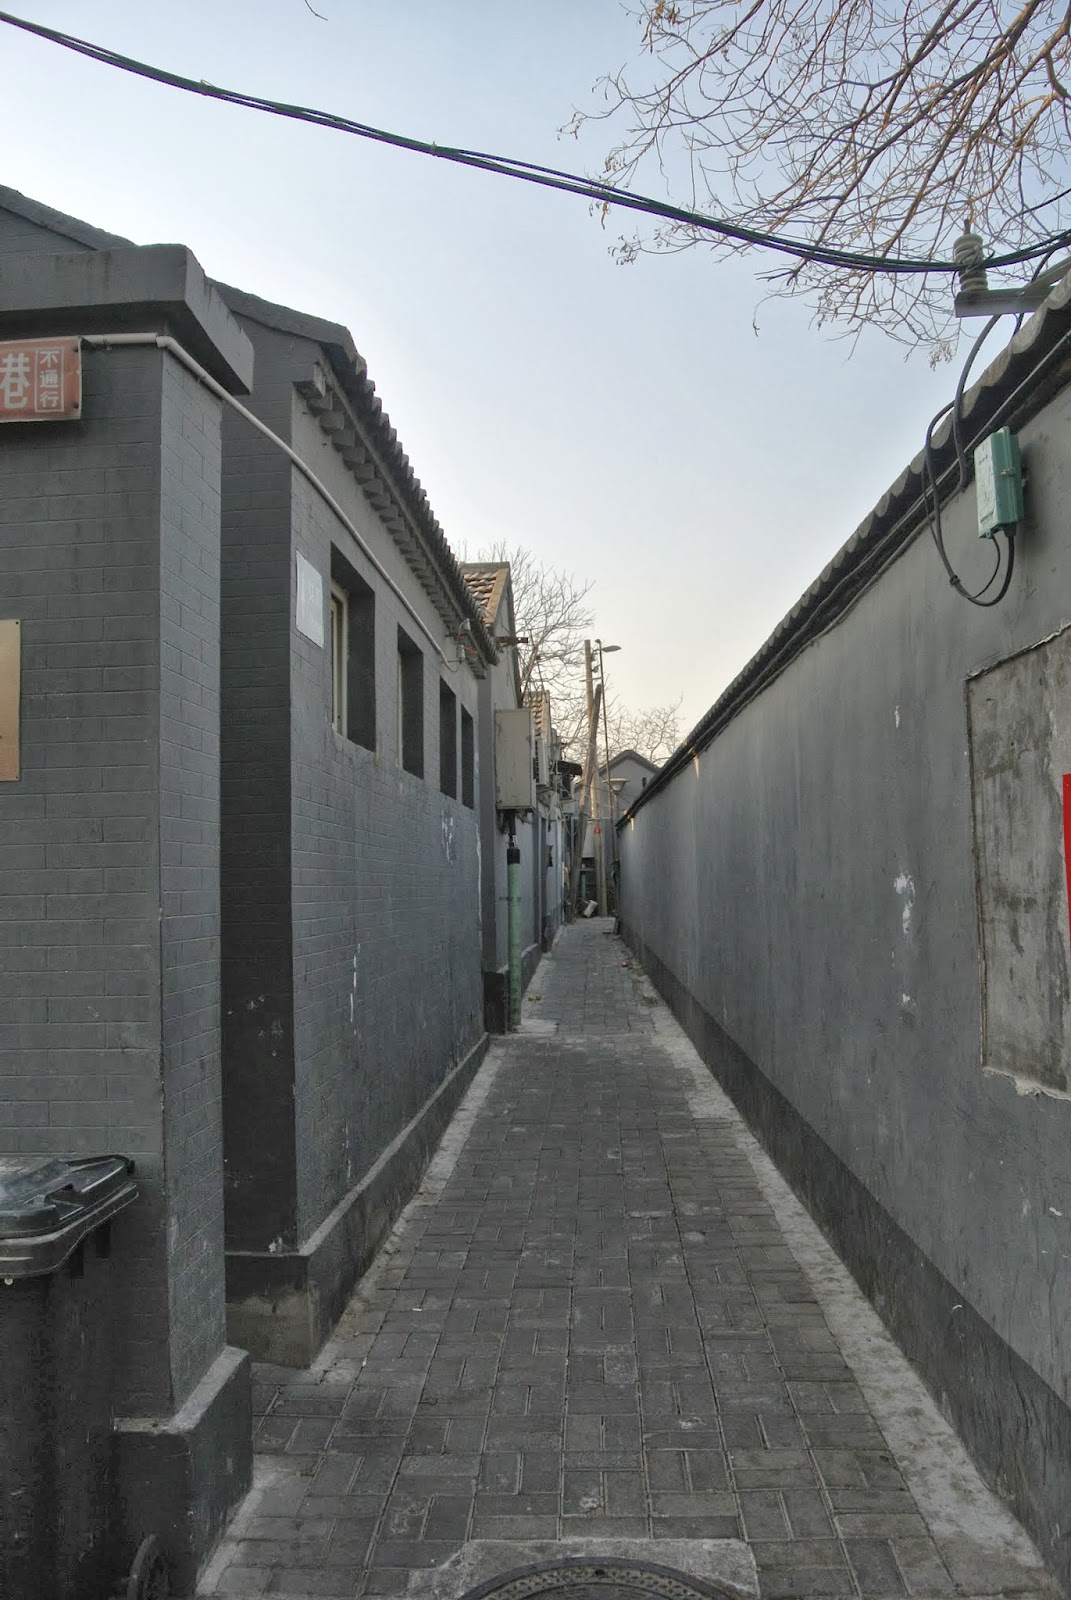  There was a guard who looked like he was in a rush and he came up, passed us, and turned into this alley. It looks like something out of the dramas! I wonder if they film here.. I wanted to follow him to see where he went. Literally once he turned, 